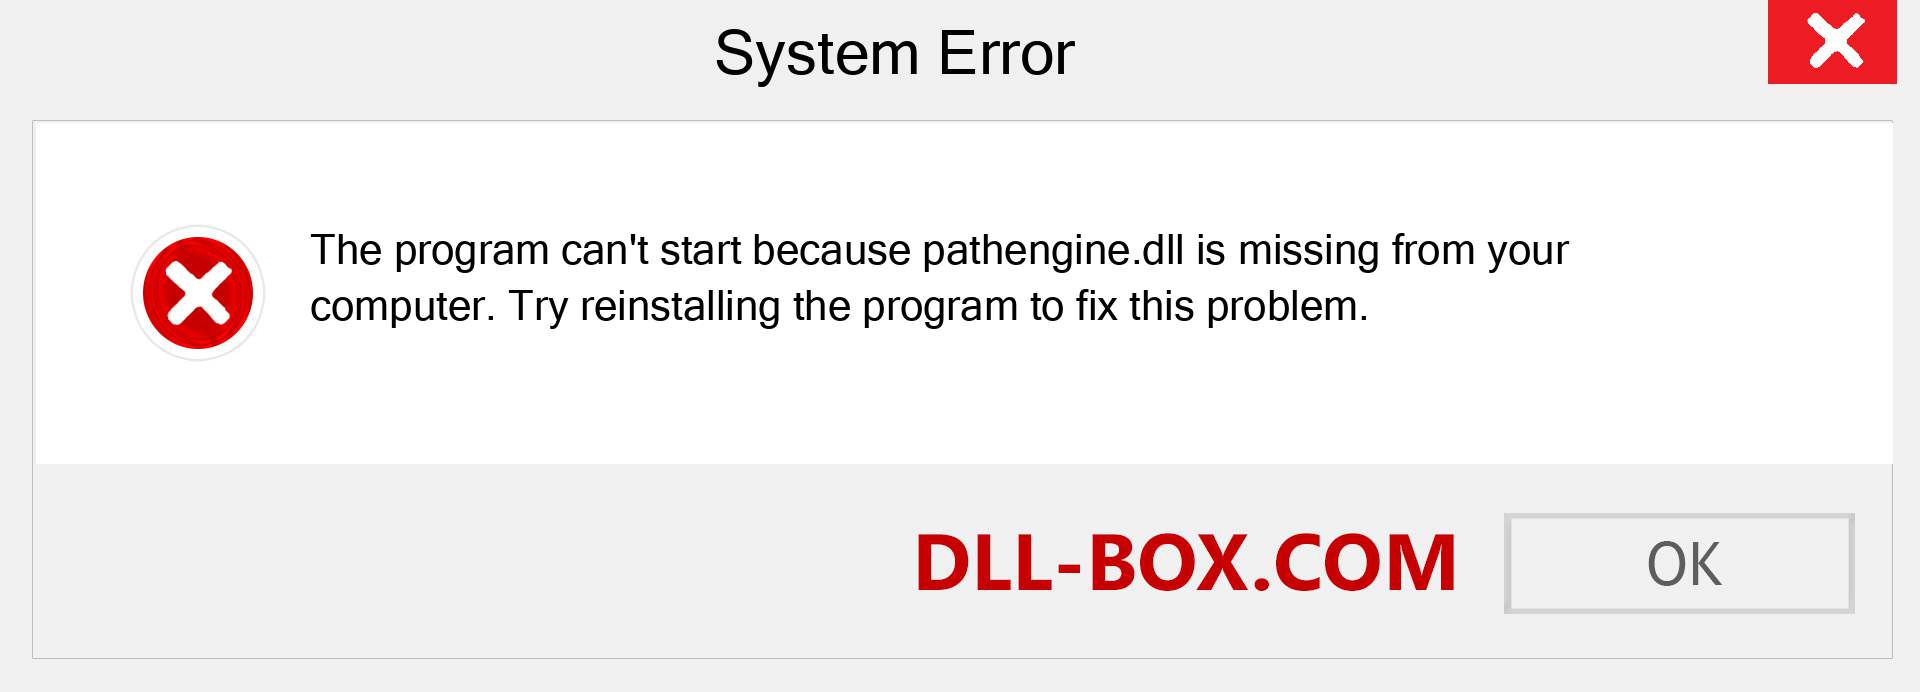  pathengine.dll file is missing?. Download for Windows 7, 8, 10 - Fix  pathengine dll Missing Error on Windows, photos, images